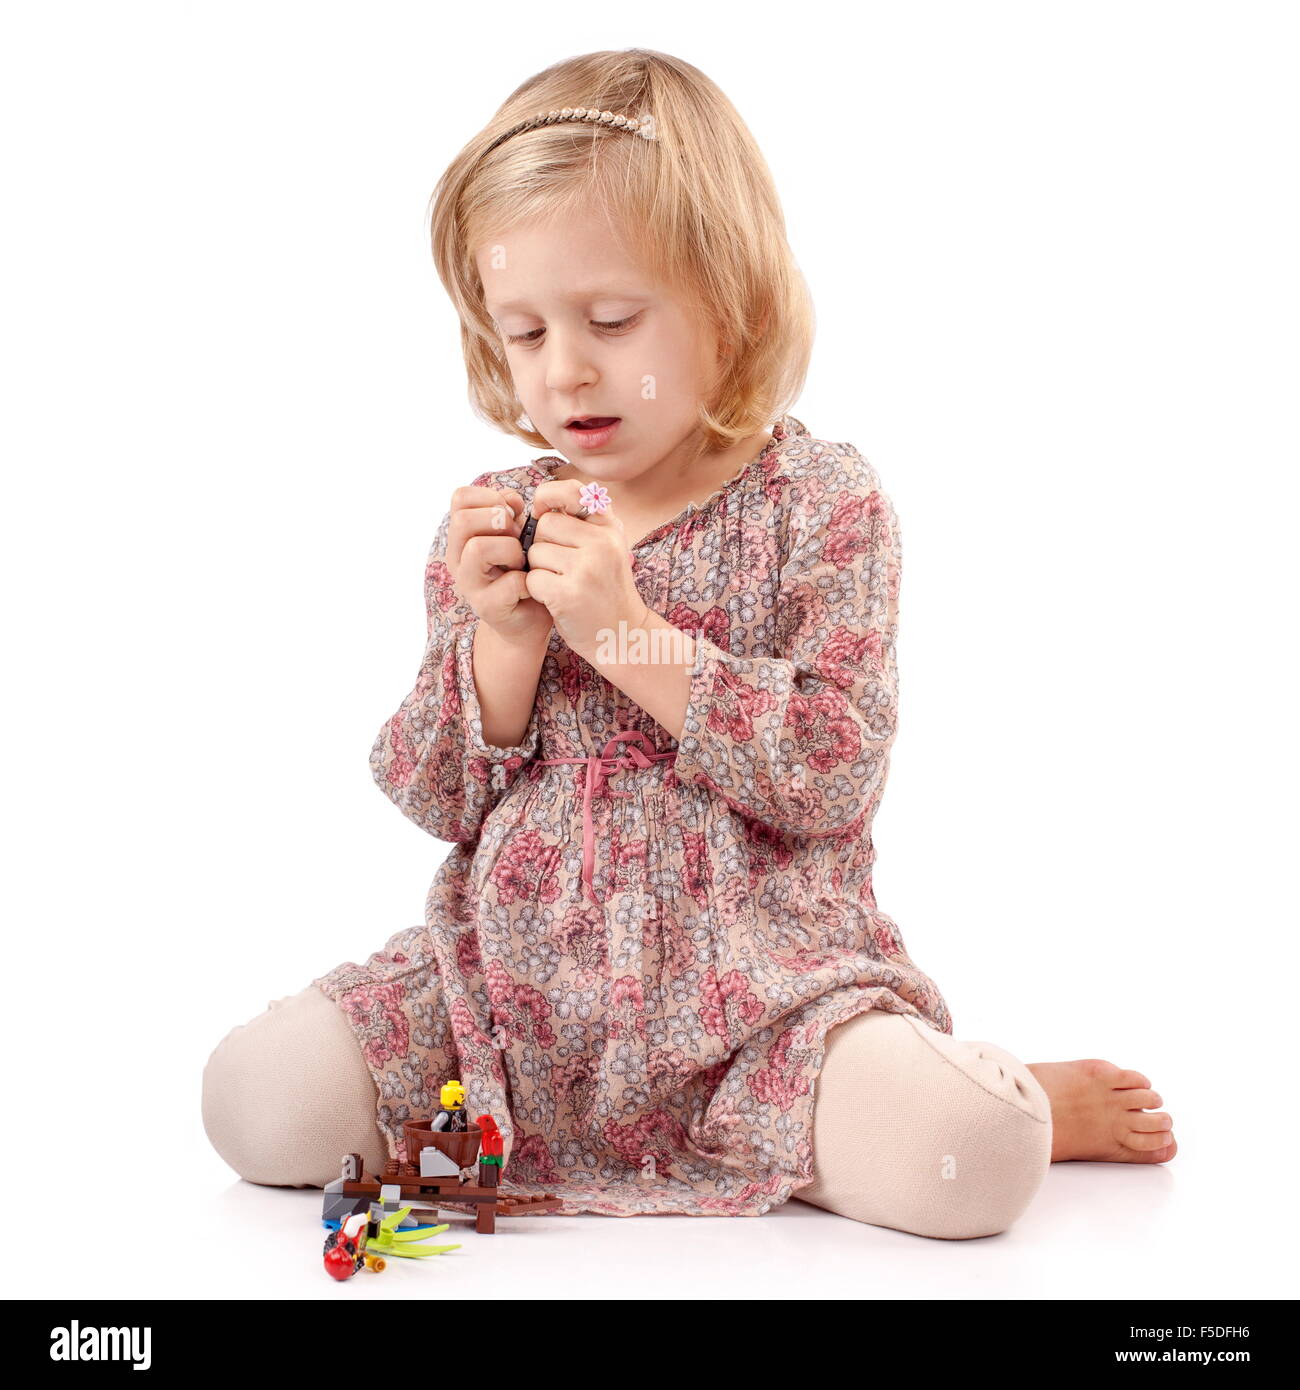 Very thoughtful girl playing with small toys Stock Photo